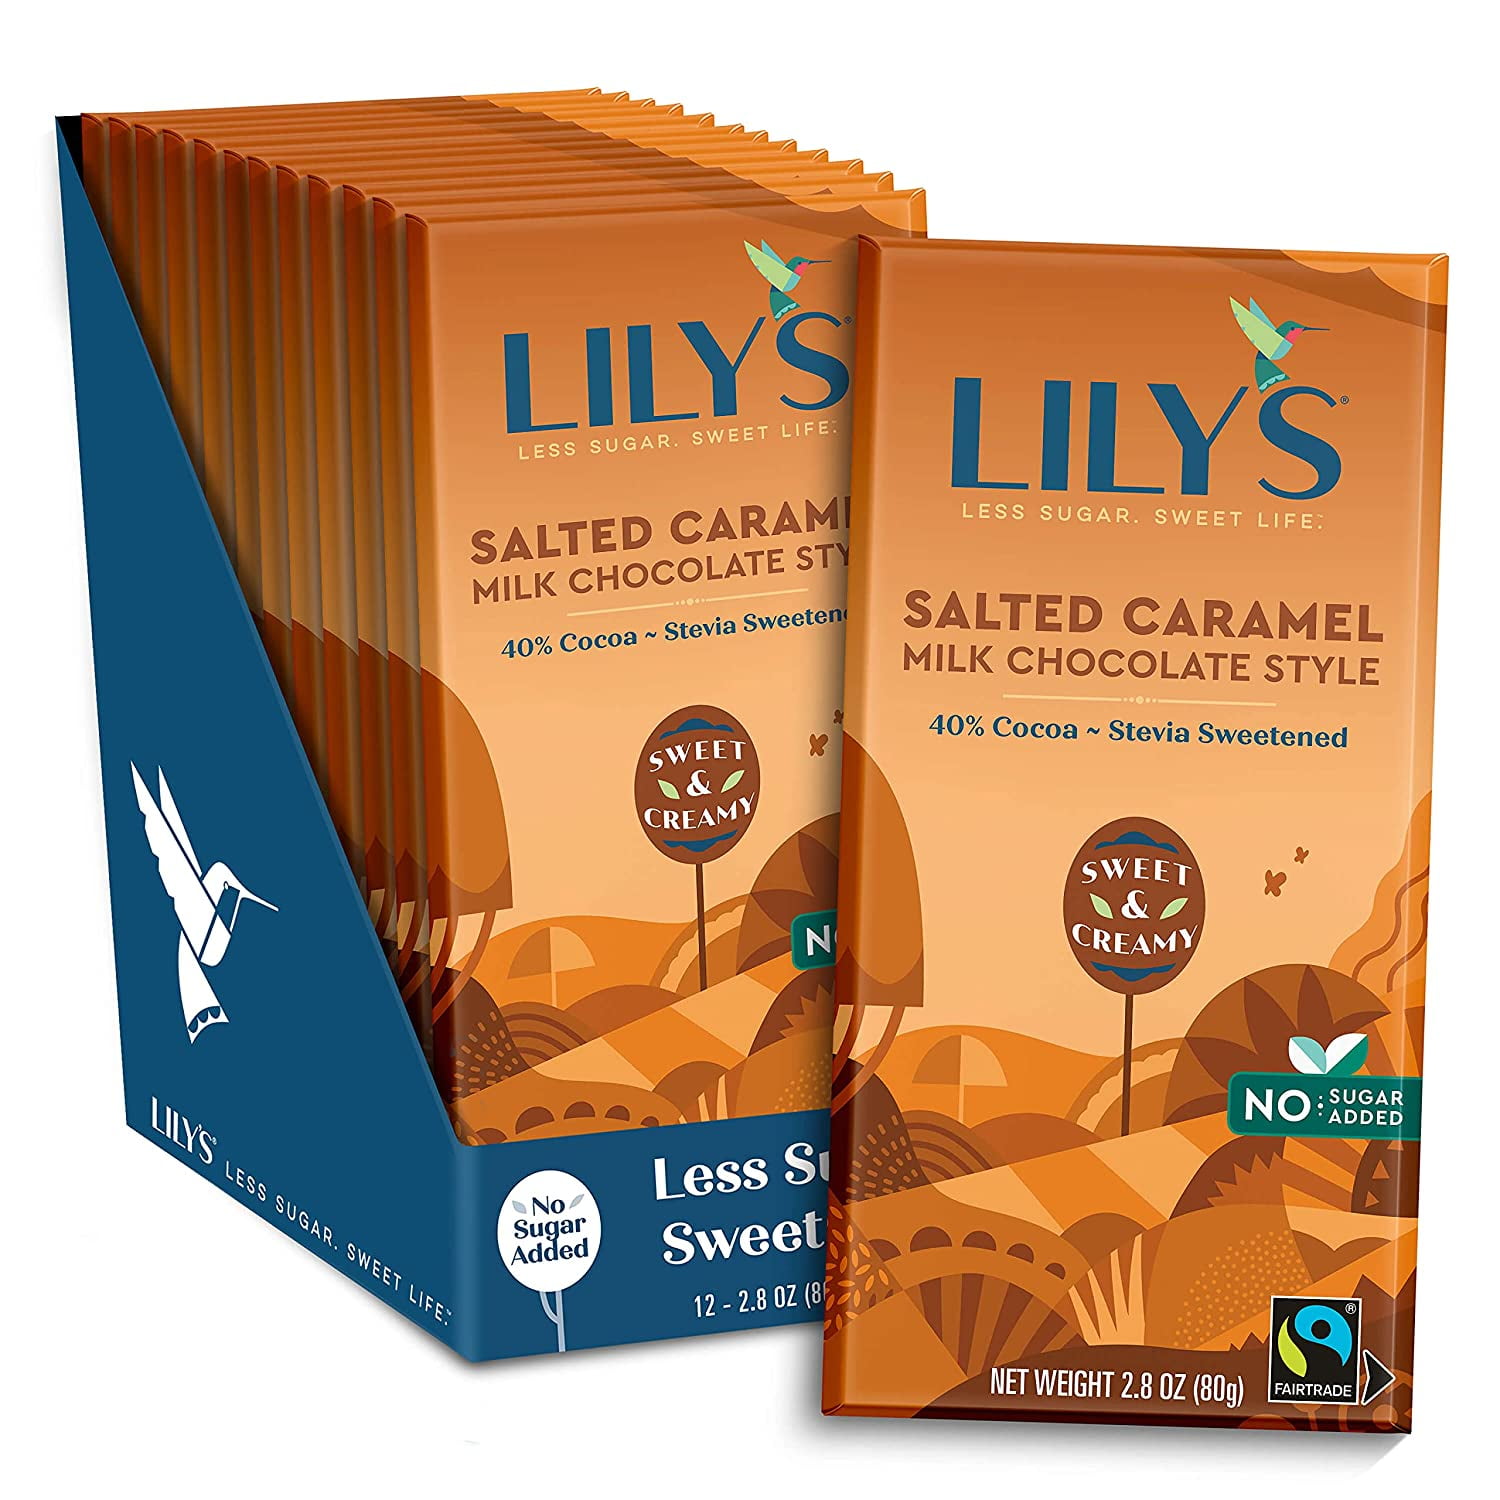 Salted Caramel Milk Chocolate Style Bar by Lily's   Made with Stevia, No  Added Sugar, Low Carb, Keto Friendly   20 Cocoa   Fair Trade, Gluten Free  & ...